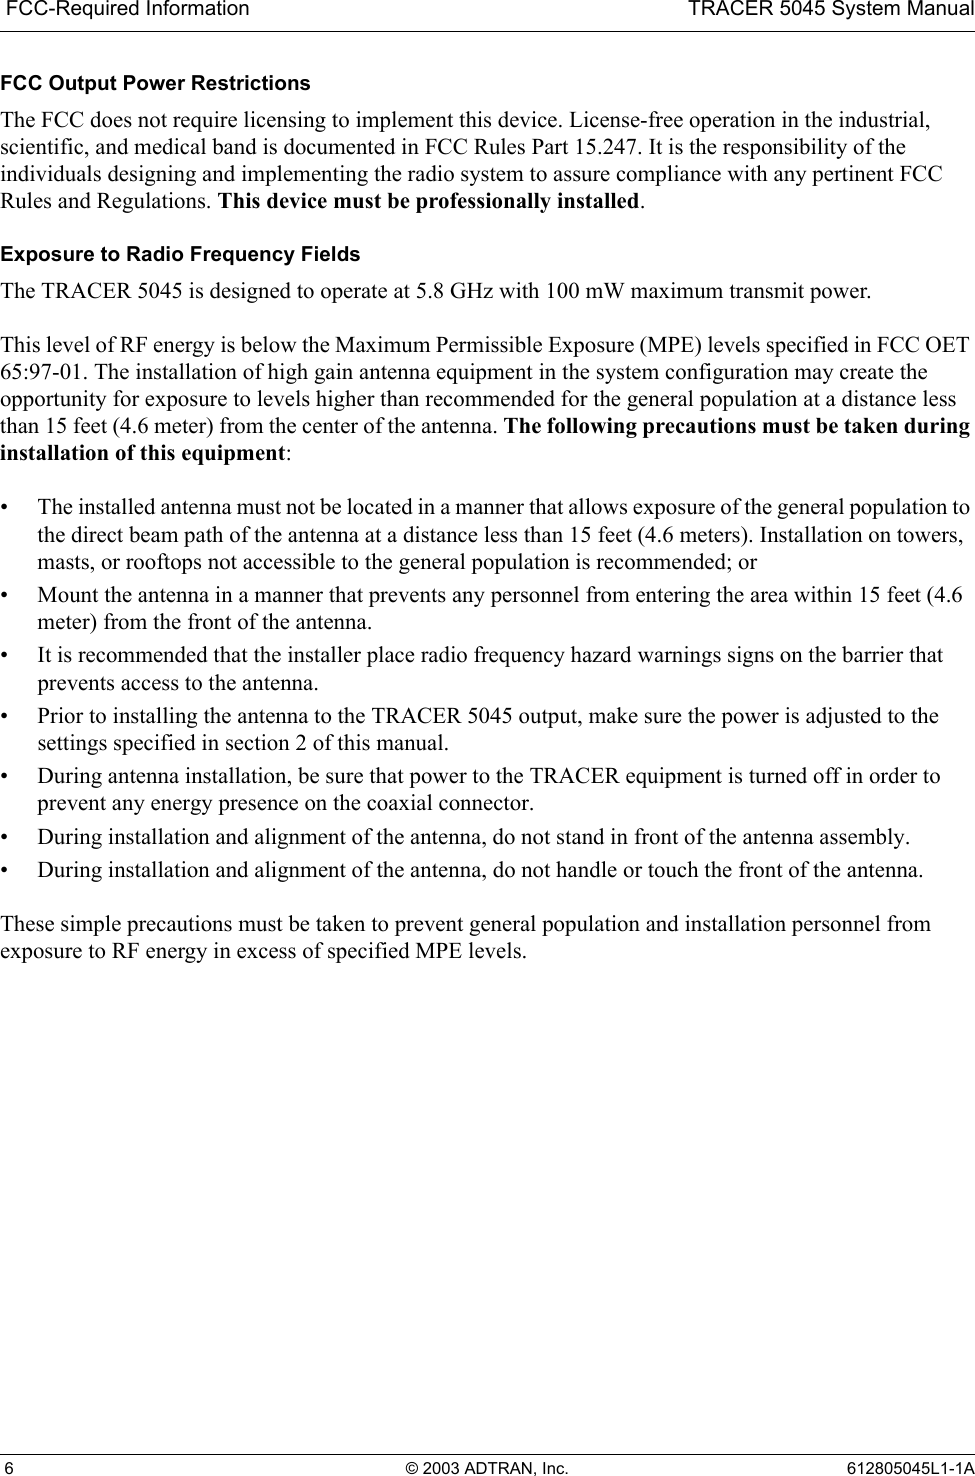  FCC-Required Information TRACER 5045 System Manual 6 © 2003 ADTRAN, Inc. 612805045L1-1AFCC Output Power RestrictionsThe FCC does not require licensing to implement this device. License-free operation in the industrial, scientific, and medical band is documented in FCC Rules Part 15.247. It is the responsibility of the individuals designing and implementing the radio system to assure compliance with any pertinent FCC Rules and Regulations. This device must be professionally installed.Exposure to Radio Frequency FieldsThe TRACER 5045 is designed to operate at 5.8 GHz with 100 mW maximum transmit power.This level of RF energy is below the Maximum Permissible Exposure (MPE) levels specified in FCC OET 65:97-01. The installation of high gain antenna equipment in the system configuration may create the opportunity for exposure to levels higher than recommended for the general population at a distance less than 15 feet (4.6 meter) from the center of the antenna. The following precautions must be taken during installation of this equipment:• The installed antenna must not be located in a manner that allows exposure of the general population to the direct beam path of the antenna at a distance less than 15 feet (4.6 meters). Installation on towers, masts, or rooftops not accessible to the general population is recommended; or• Mount the antenna in a manner that prevents any personnel from entering the area within 15 feet (4.6 meter) from the front of the antenna.• It is recommended that the installer place radio frequency hazard warnings signs on the barrier that prevents access to the antenna.• Prior to installing the antenna to the TRACER 5045 output, make sure the power is adjusted to the settings specified in section 2 of this manual.• During antenna installation, be sure that power to the TRACER equipment is turned off in order to prevent any energy presence on the coaxial connector.• During installation and alignment of the antenna, do not stand in front of the antenna assembly.• During installation and alignment of the antenna, do not handle or touch the front of the antenna.These simple precautions must be taken to prevent general population and installation personnel from exposure to RF energy in excess of specified MPE levels.